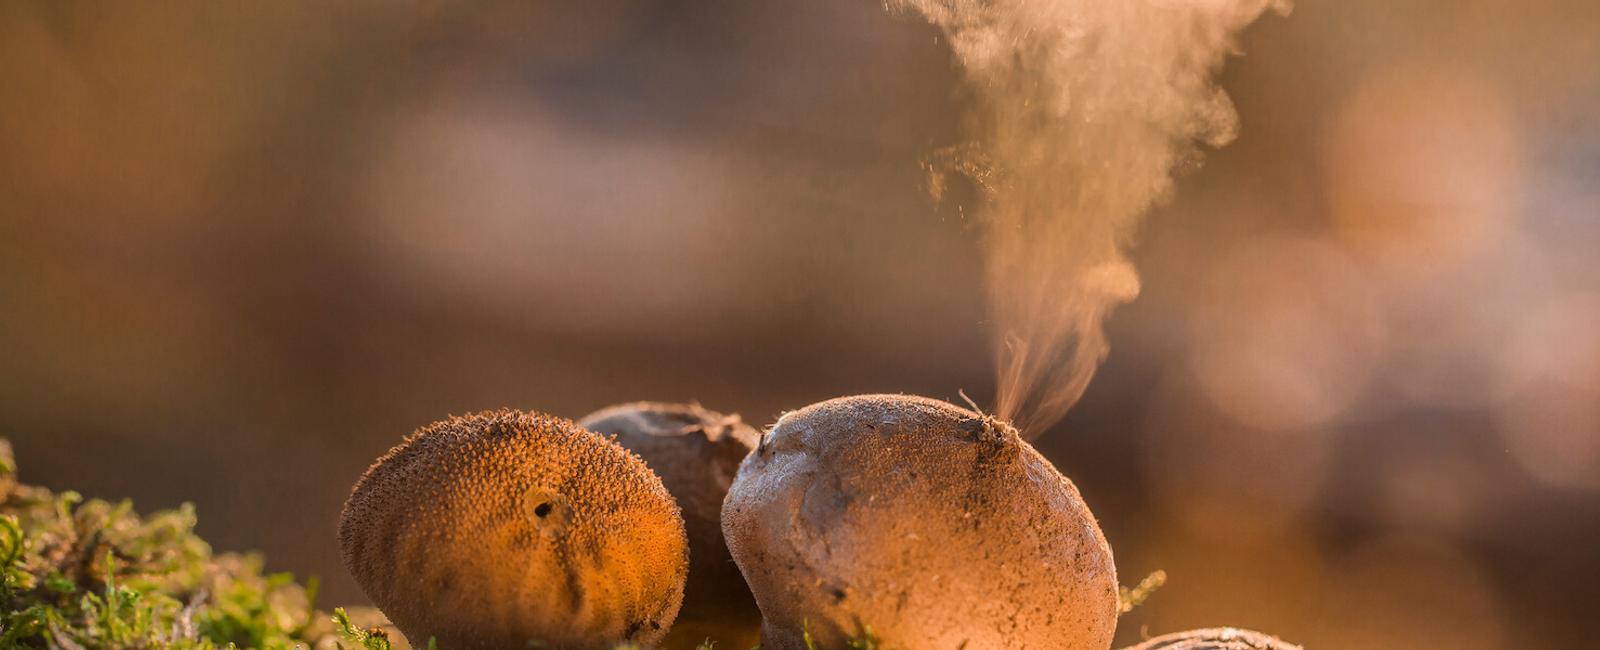 The Complete Guide to Puffball Mushrooms